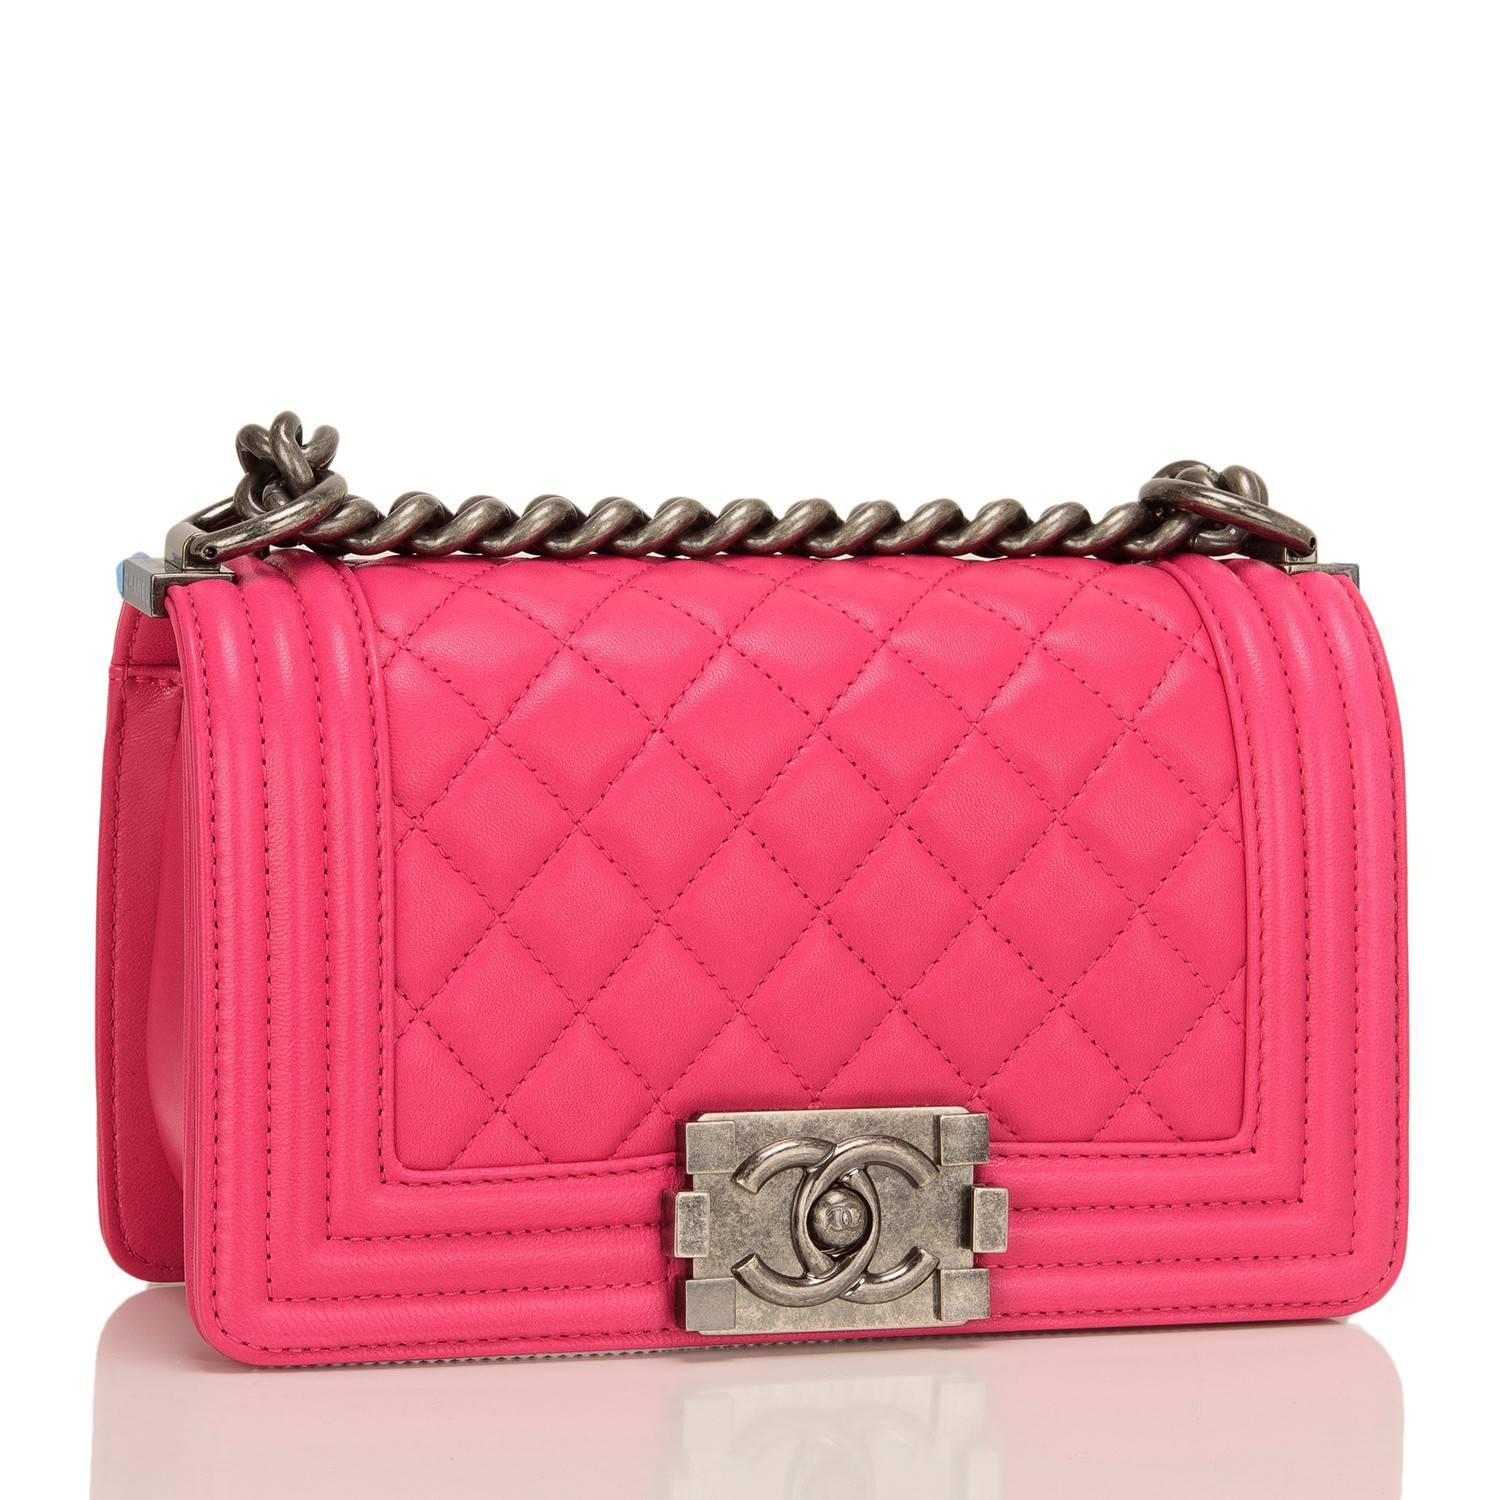 Chanel Small Boy bag of fuchsia pink lambskin leather with aged ruthenium hardware.

This bag features a full front flap with the Boy signature CC push lock closure with an aged ruthenium chain link and fuchsia pink leather padded shoulder/crossbody